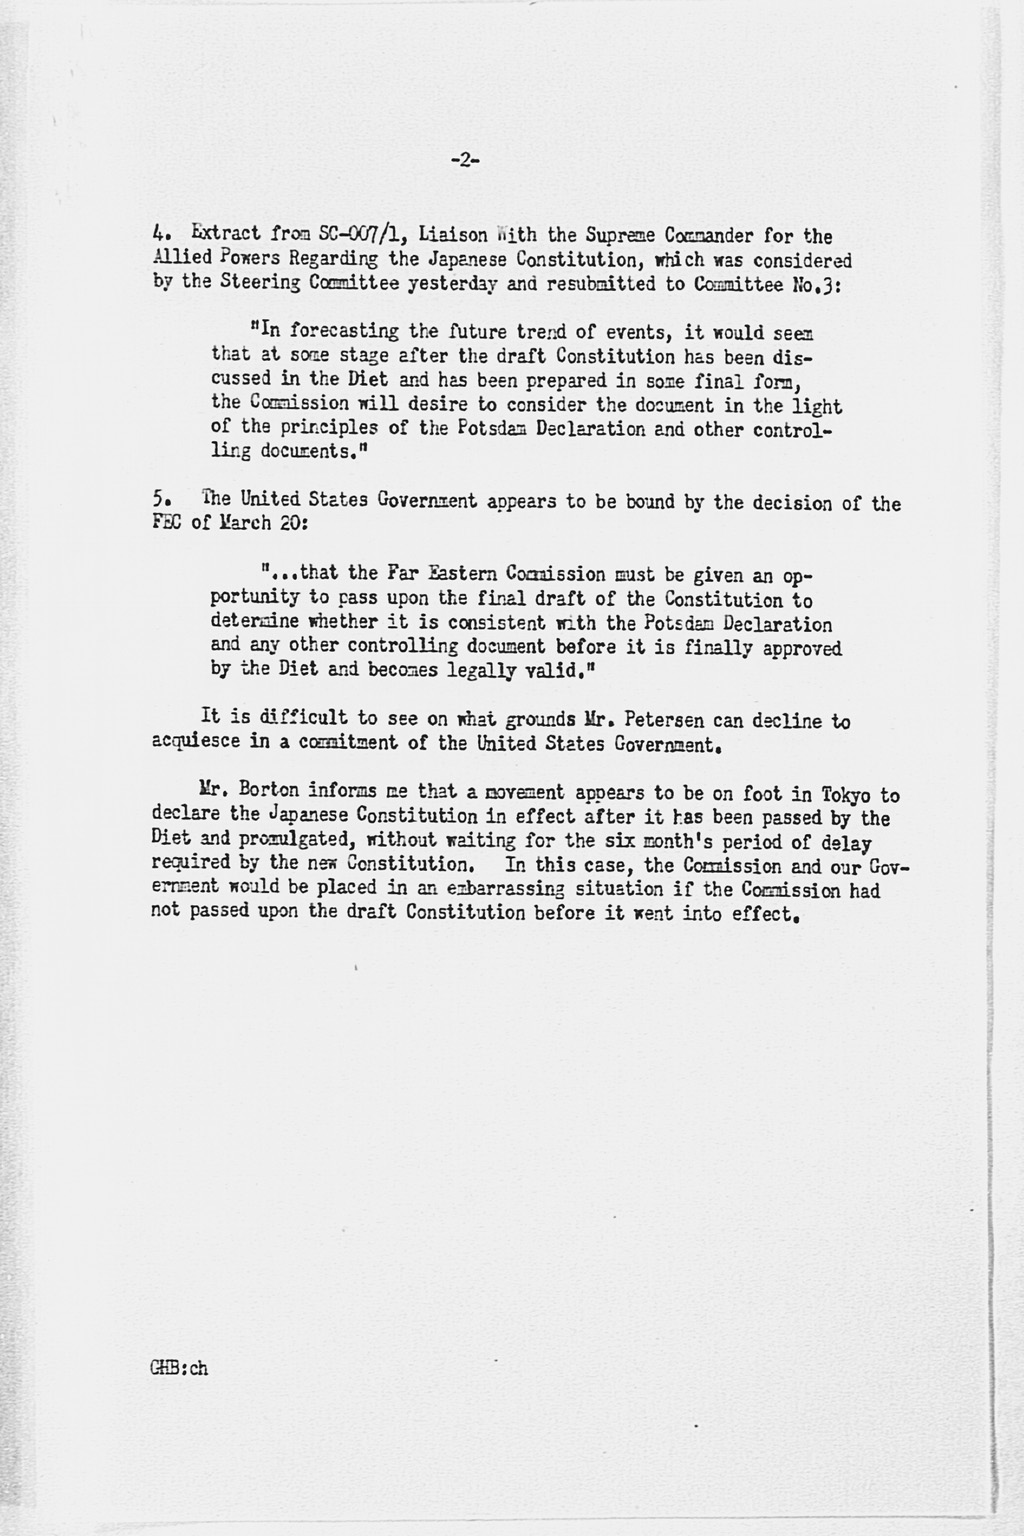 [From: GHQ SCAP Tokyo sgd MacArthur, To: War Department for WDSCA, nr Z 07139, dated 8 July 1946 re Public Release of the FEC's Basic Principles for a New Japanese Constitution](Larger image)